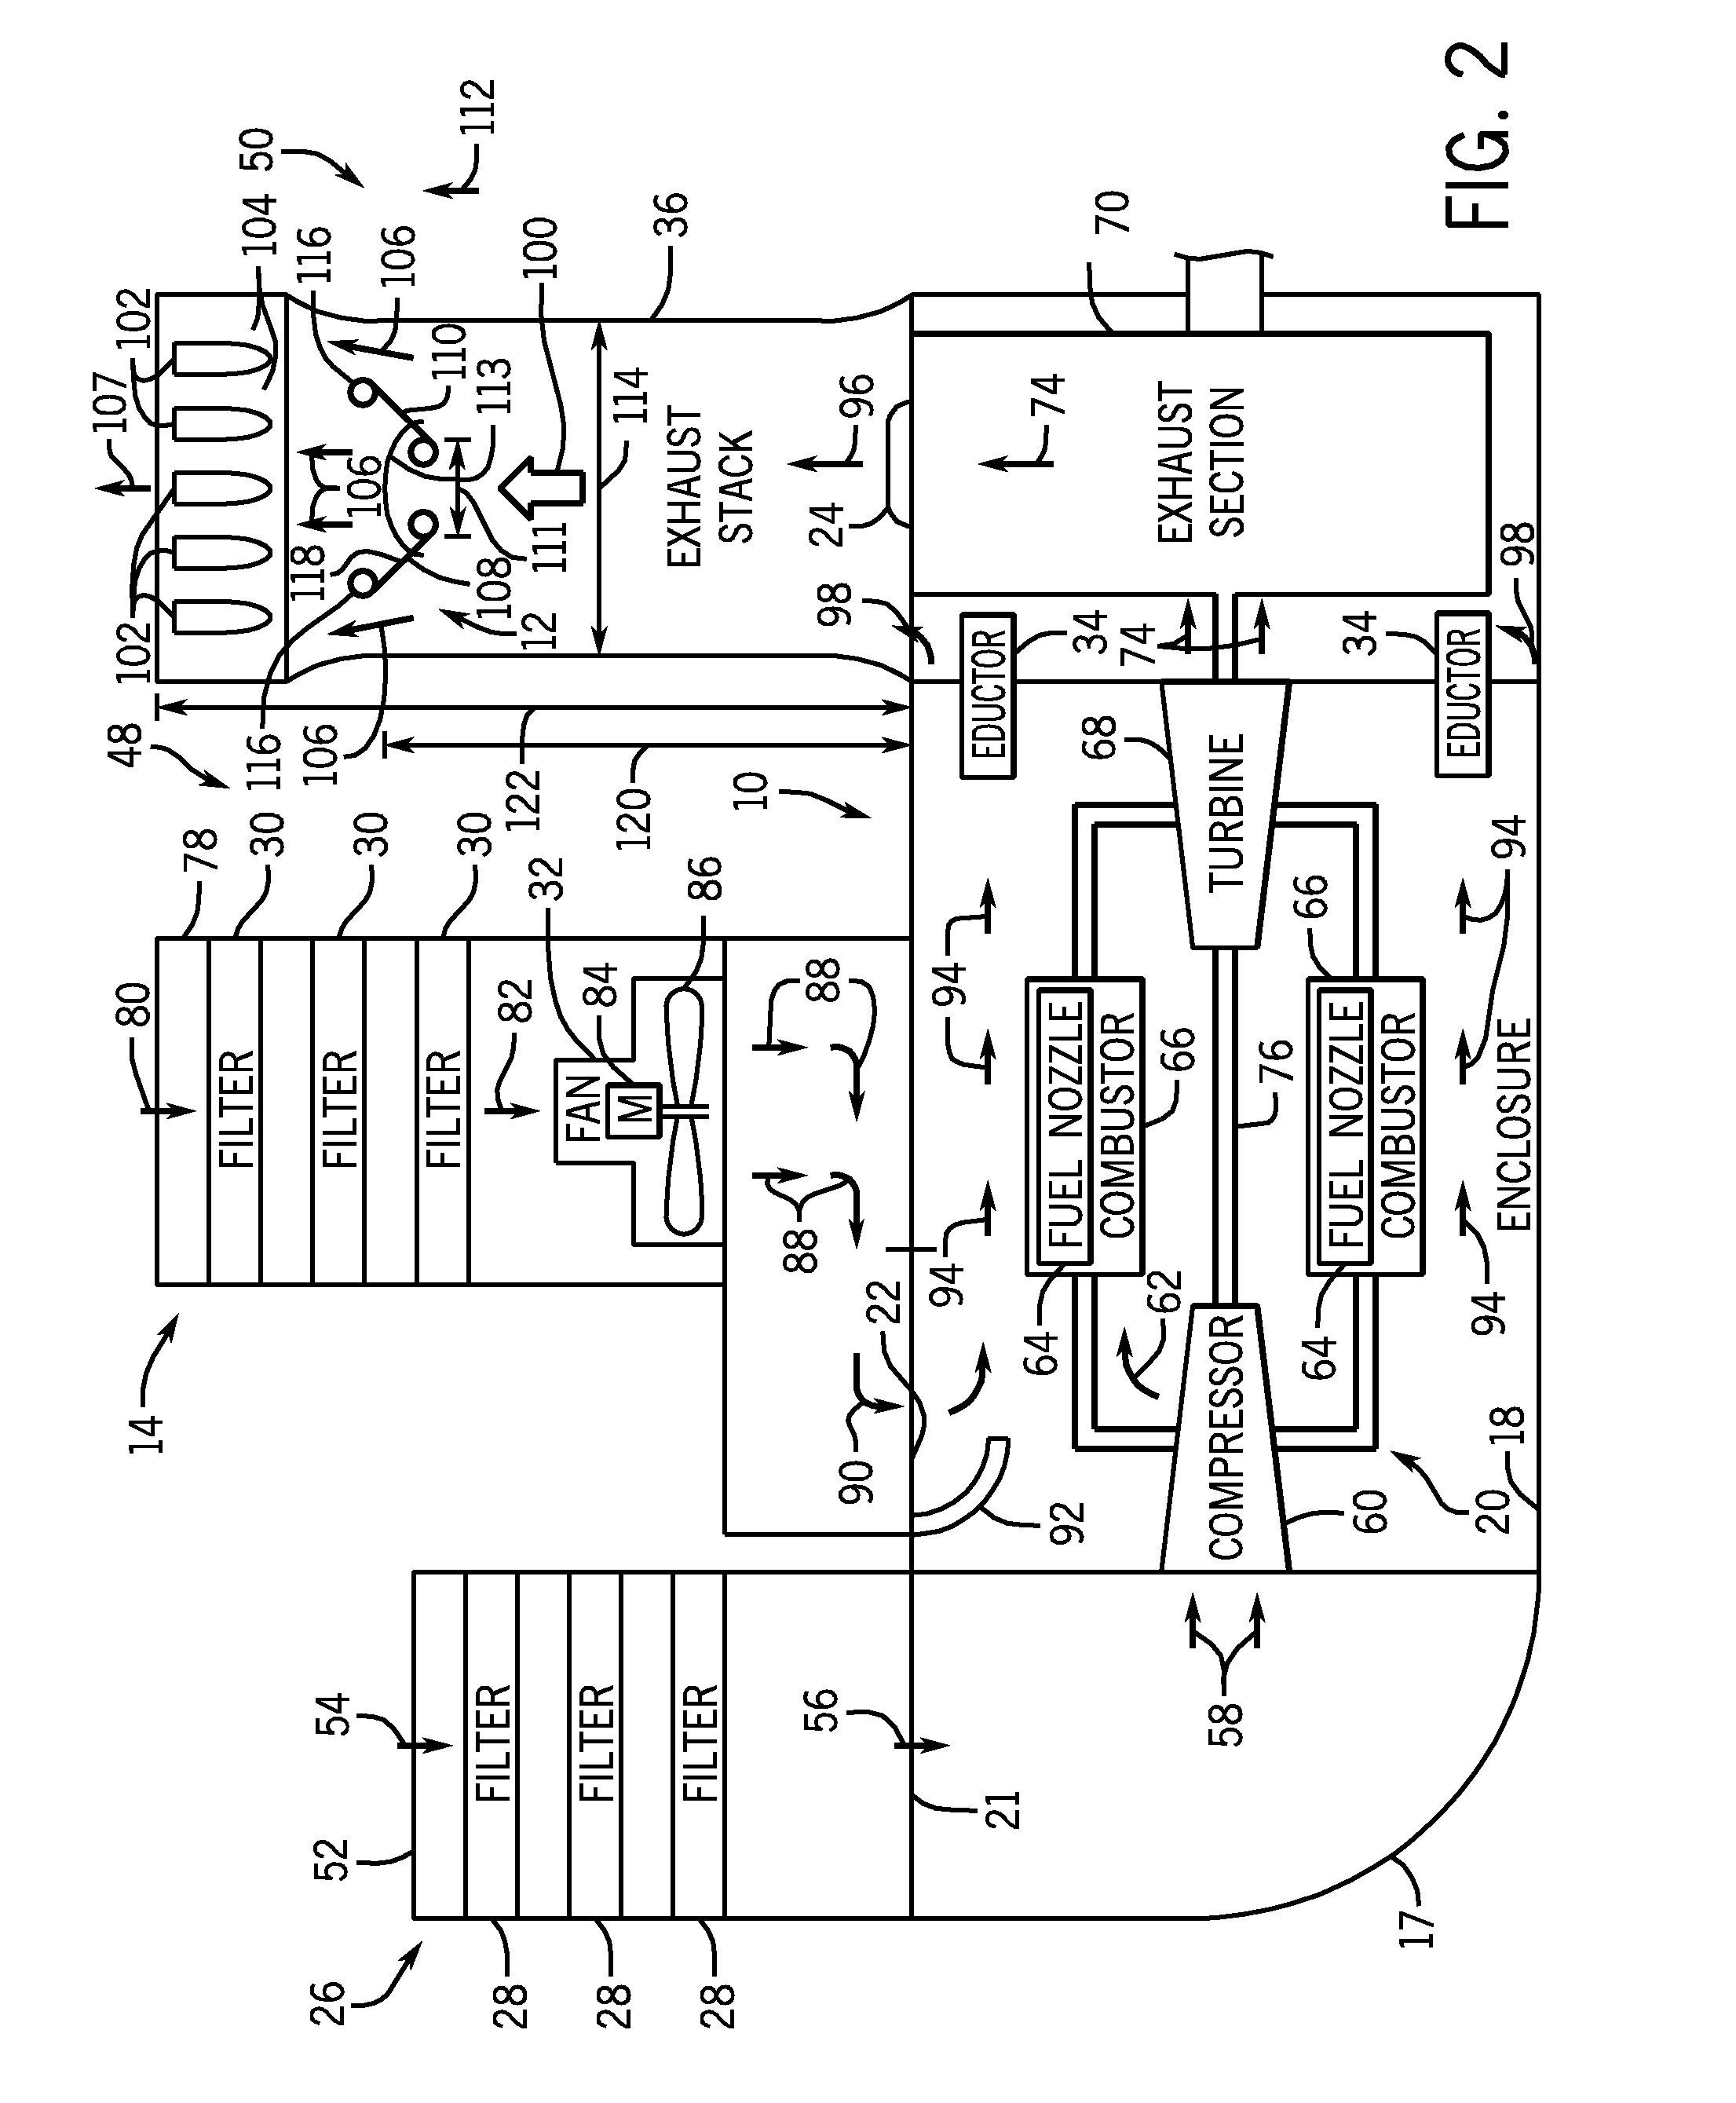 System for managing exhaust flow for a gas turbine